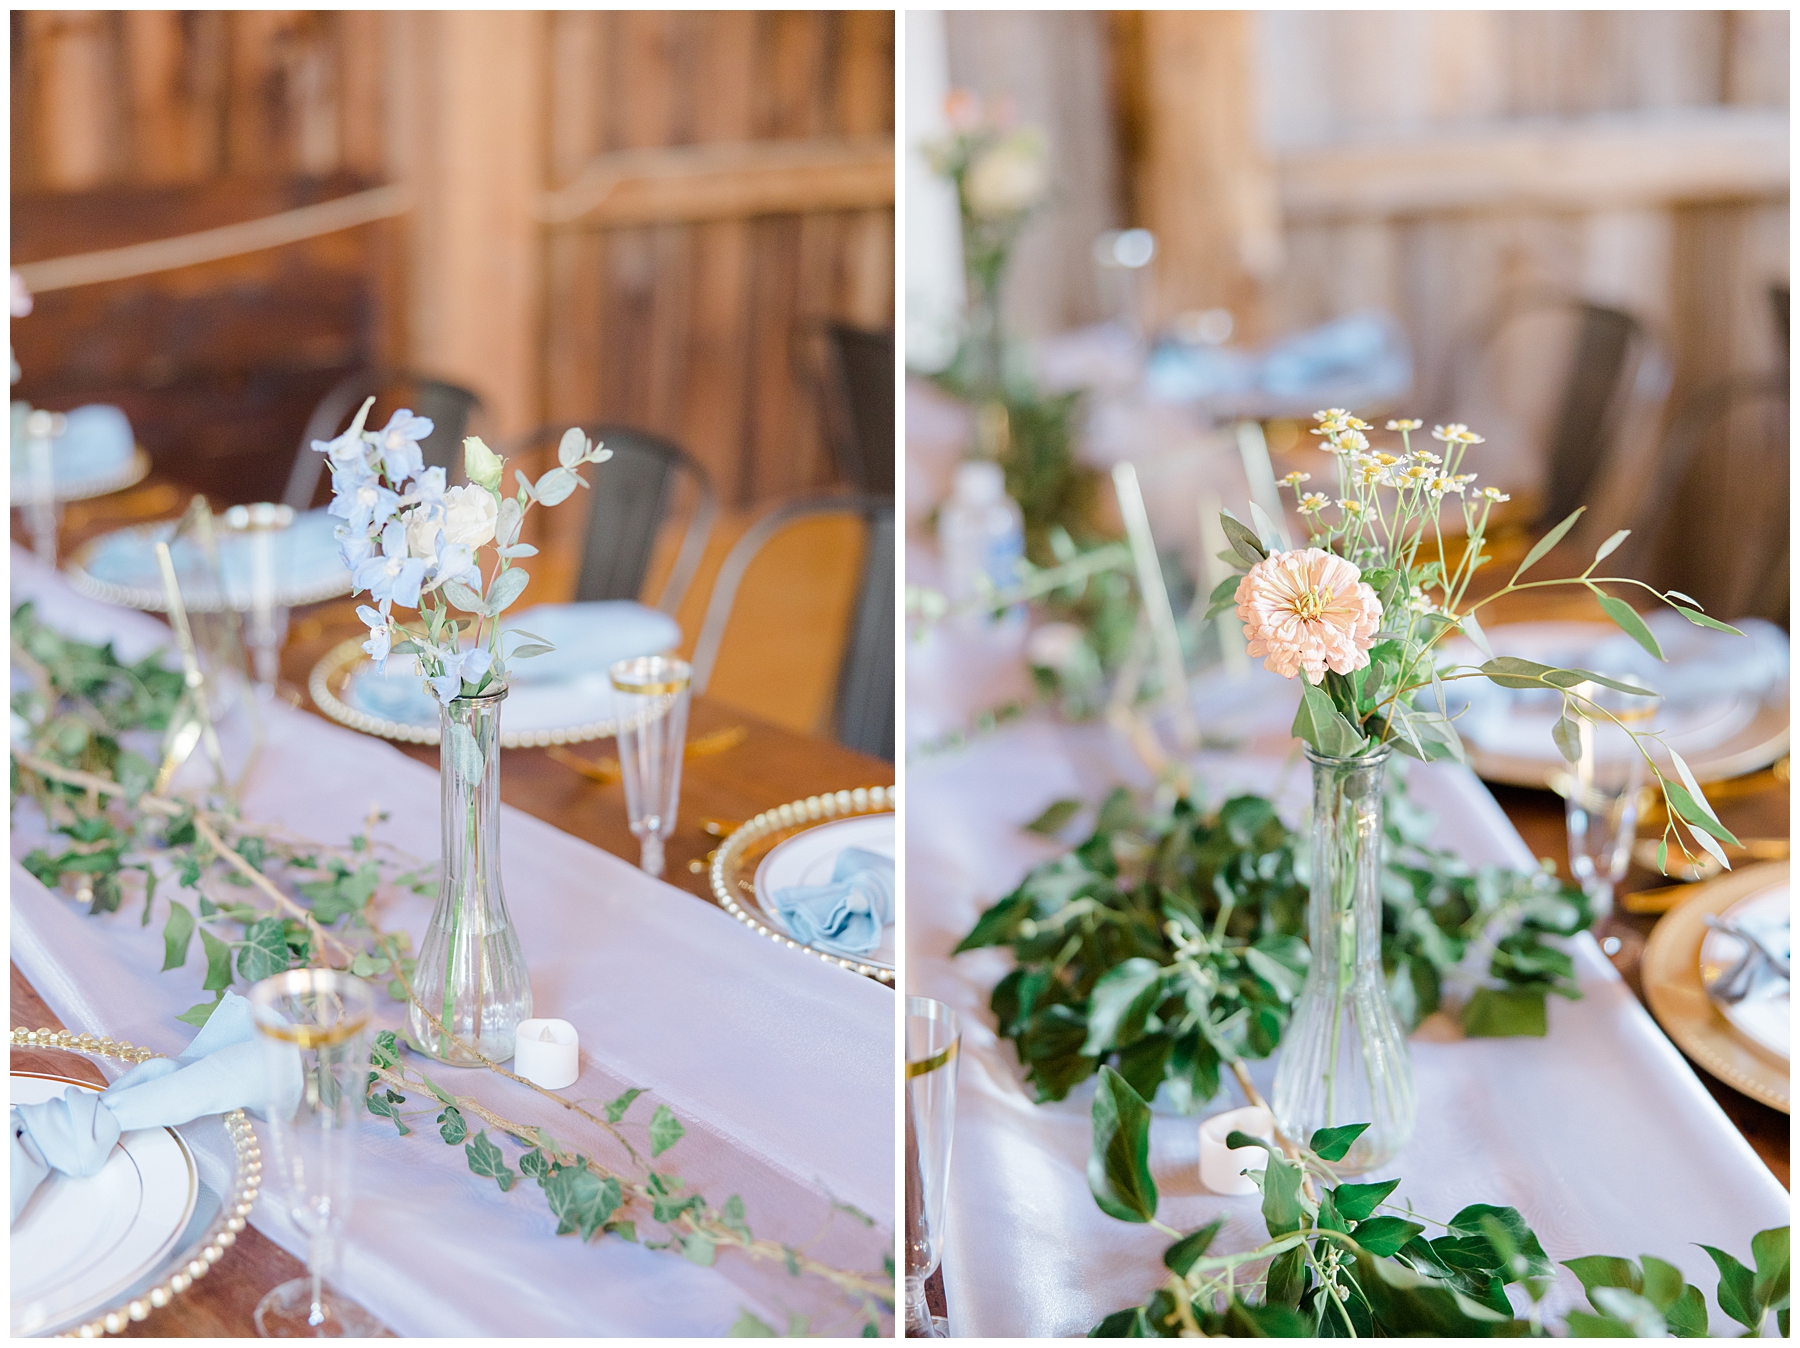 flowers and greenery decorate tables at reception